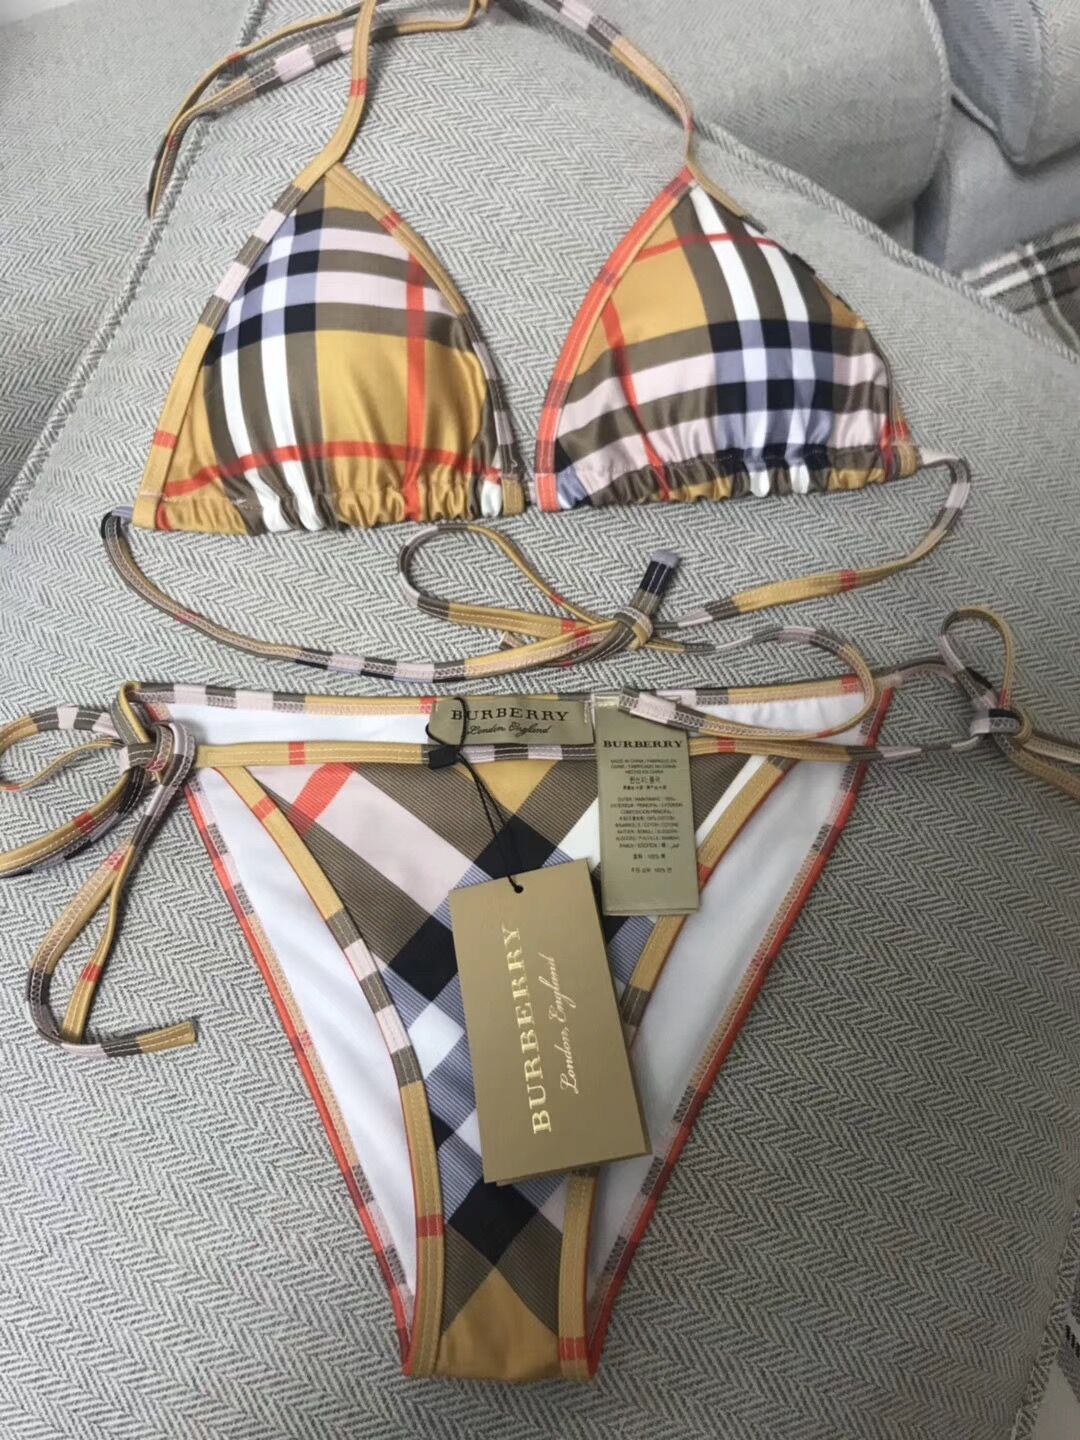 opgraven Te voet astronaut burberry inspired bathing suit,Quality assurance,protein-burger.com